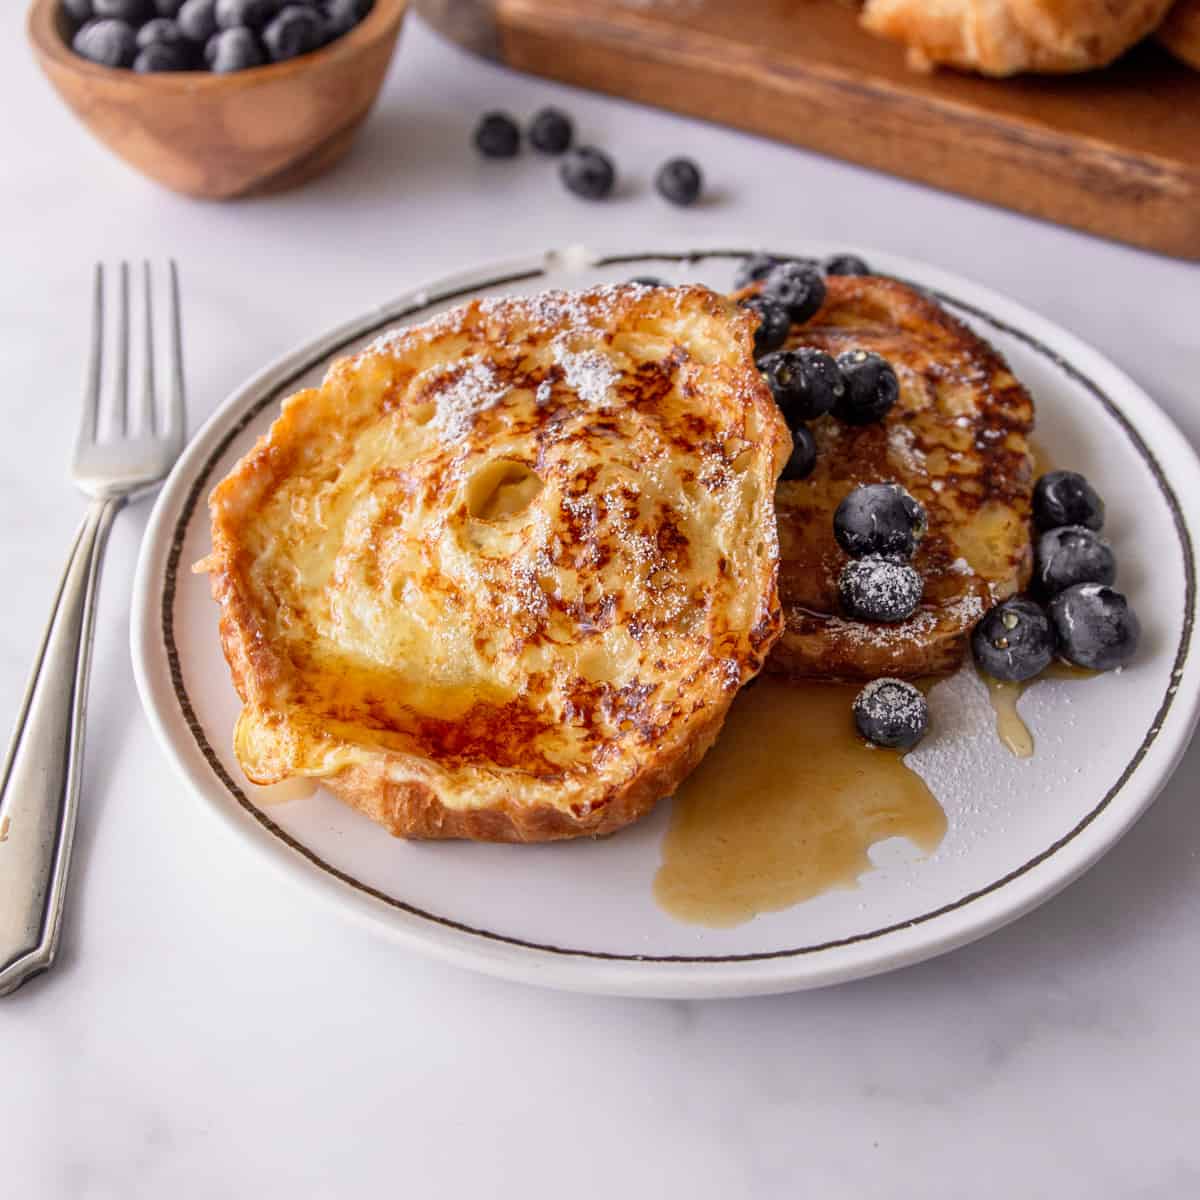 Plan the Perfect French Breakfast